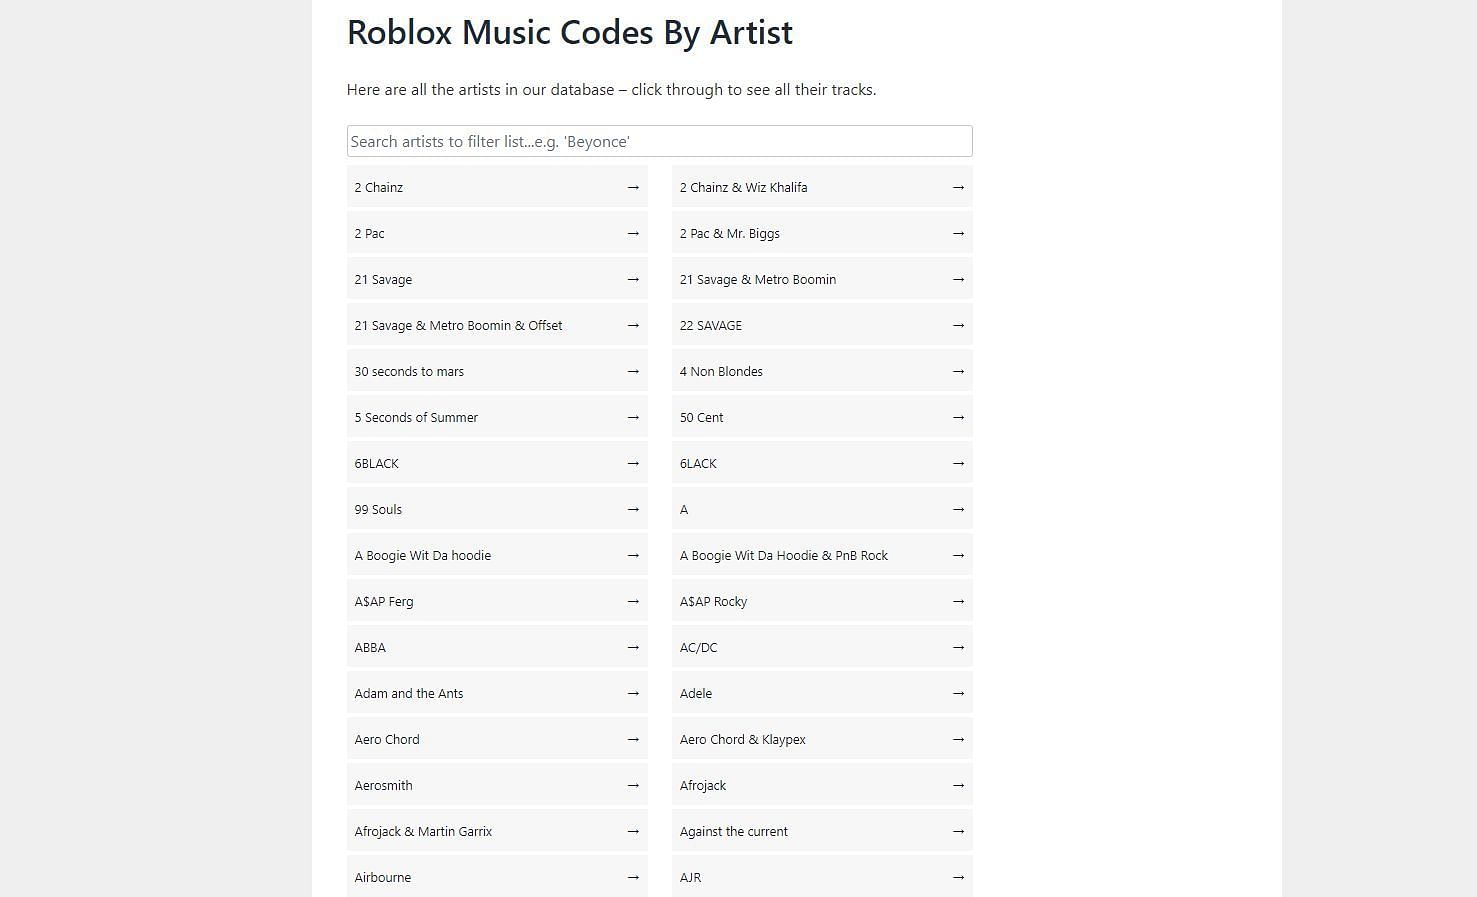 Roblox music I'd codes..#recommended #roblox #fypage #foryou #music #r, Music Recommendation